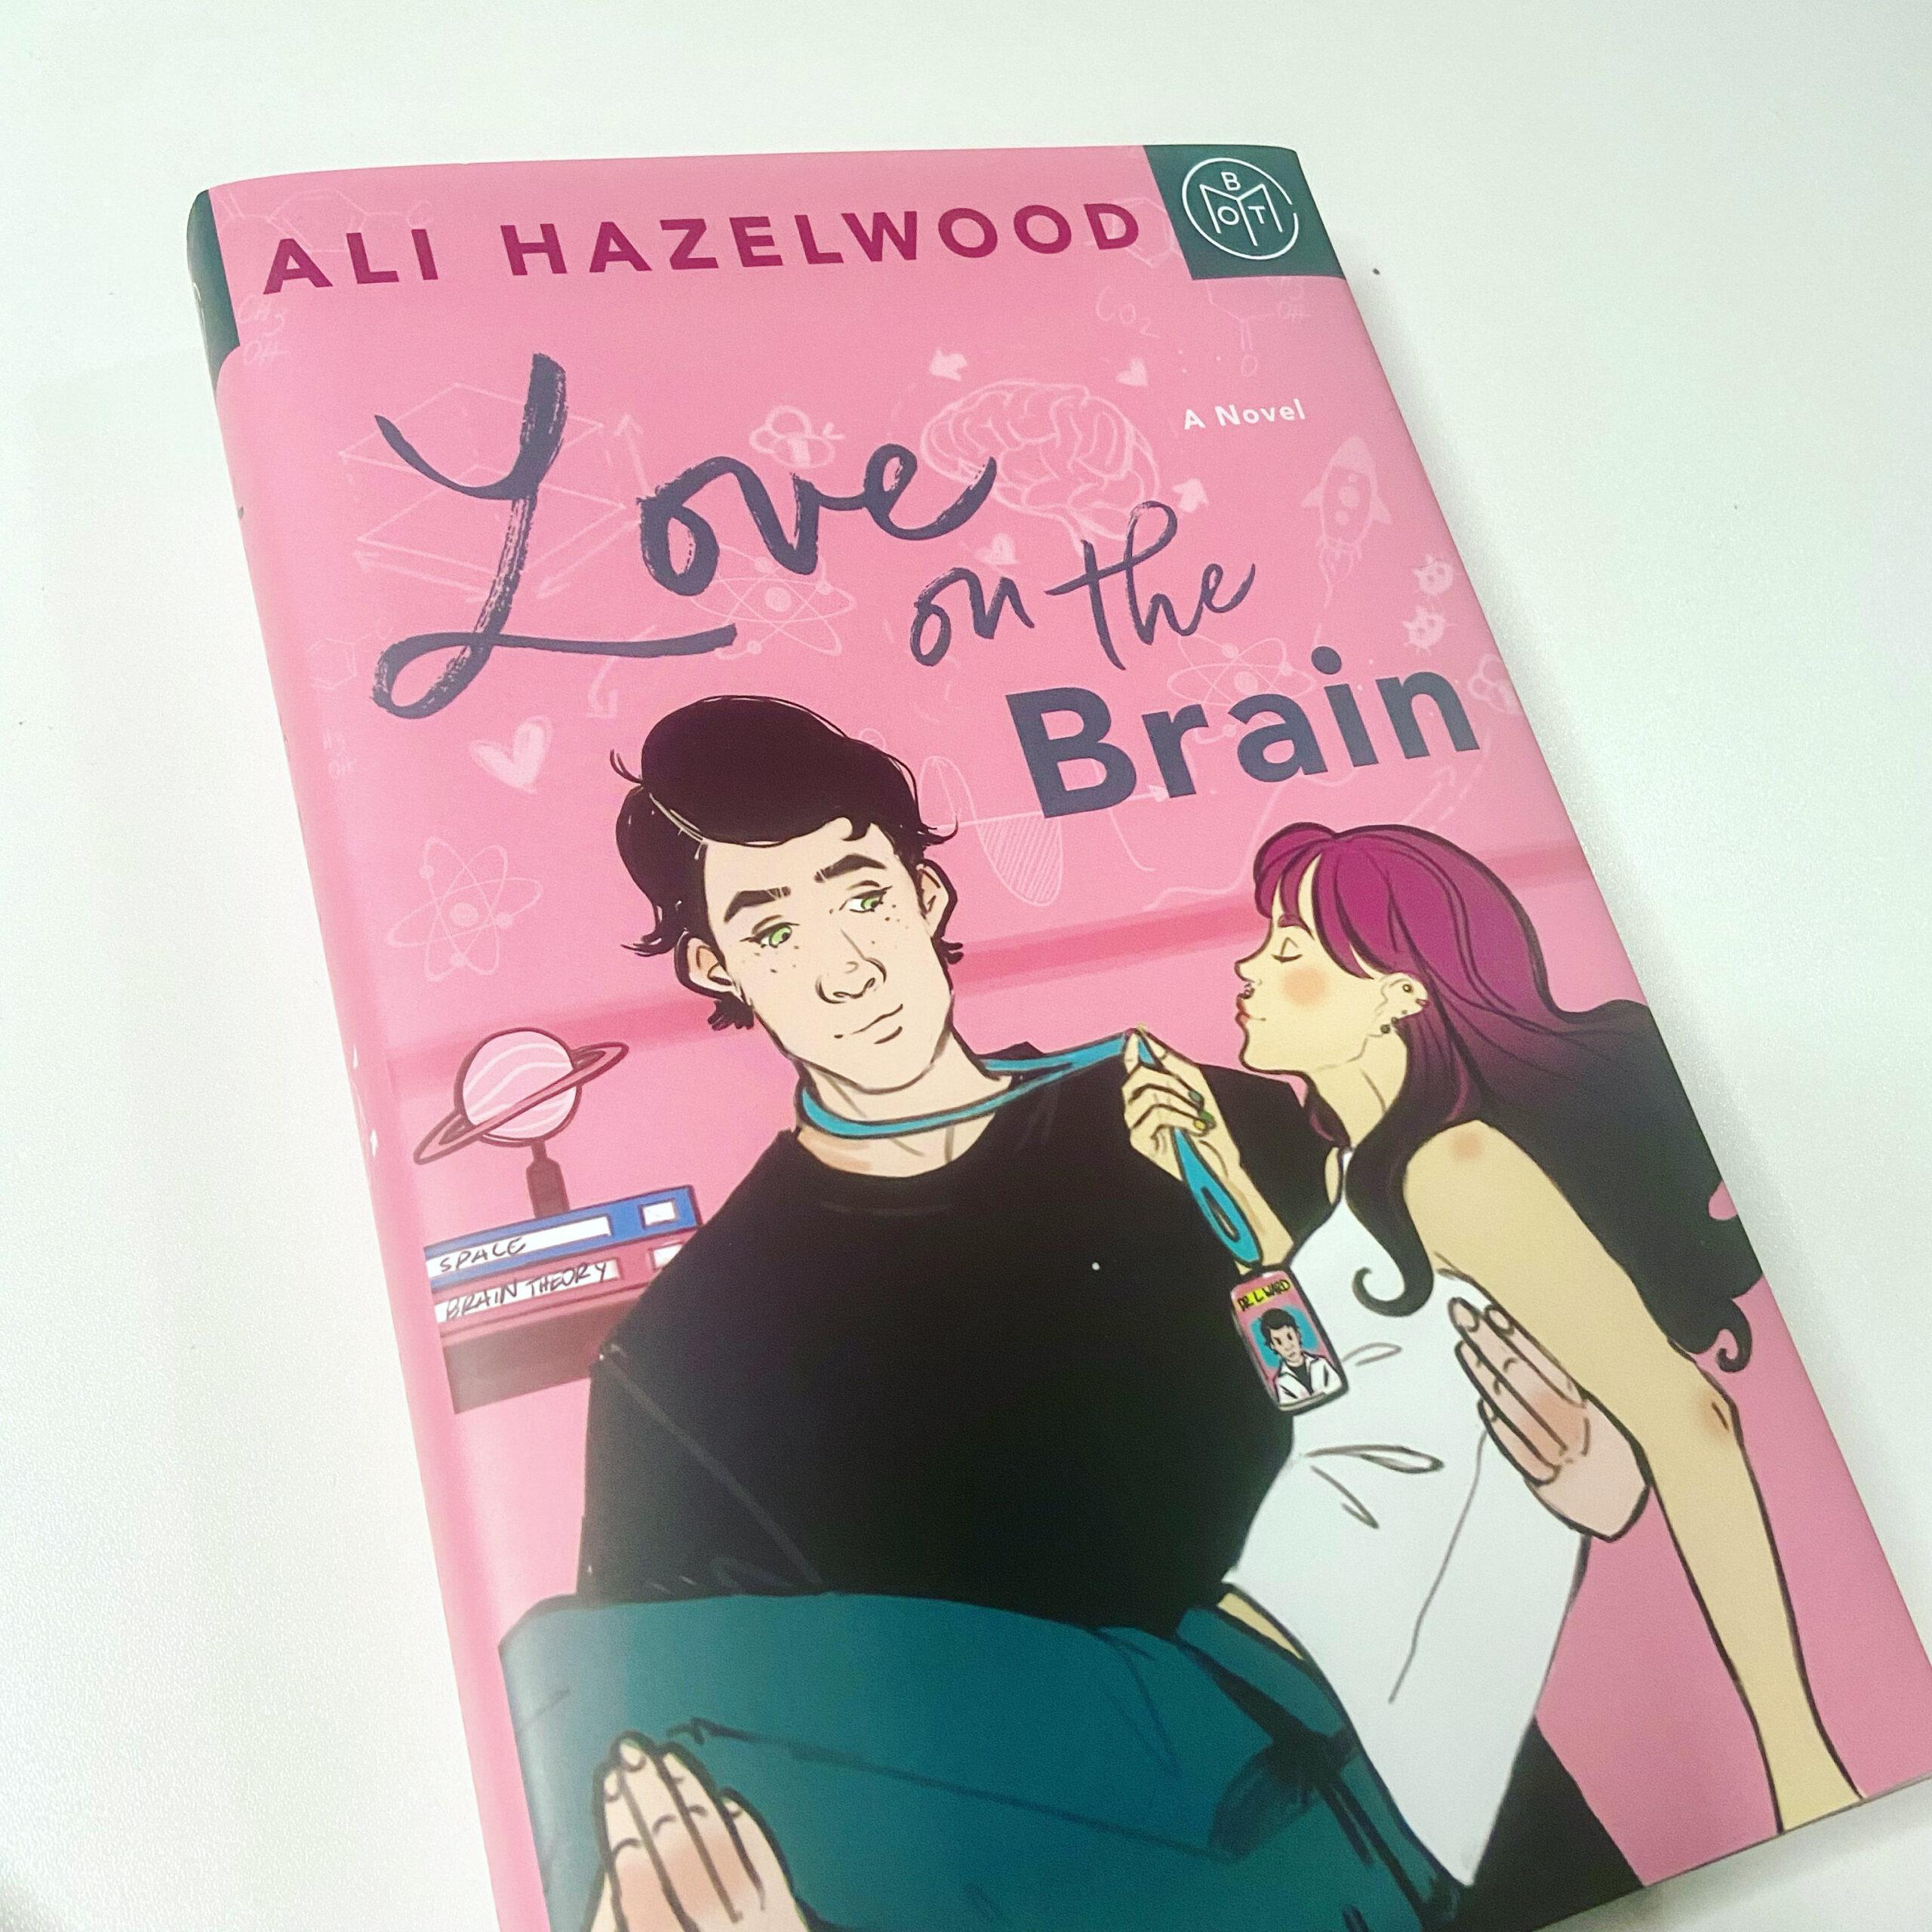 book review love on the brain